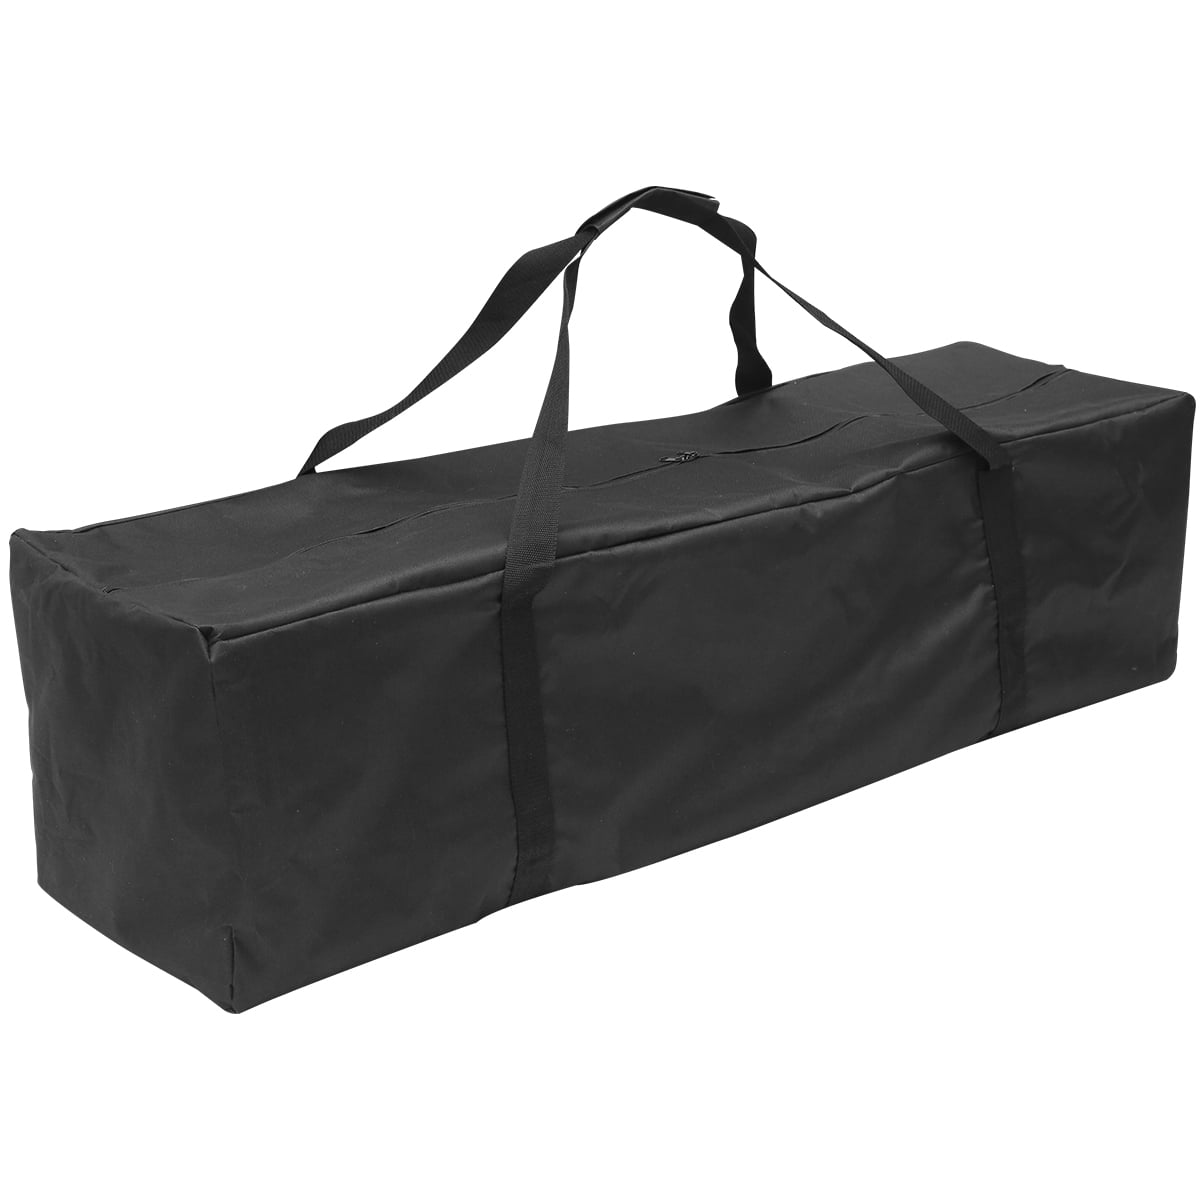 BETTERLINE Extra Large Storage Bag - Heavy Duty 45x22x16 Inches Huge Tote Duffel with Max Load of 100 lbs. (45kg) - Tear-resistant & Water-Resistant